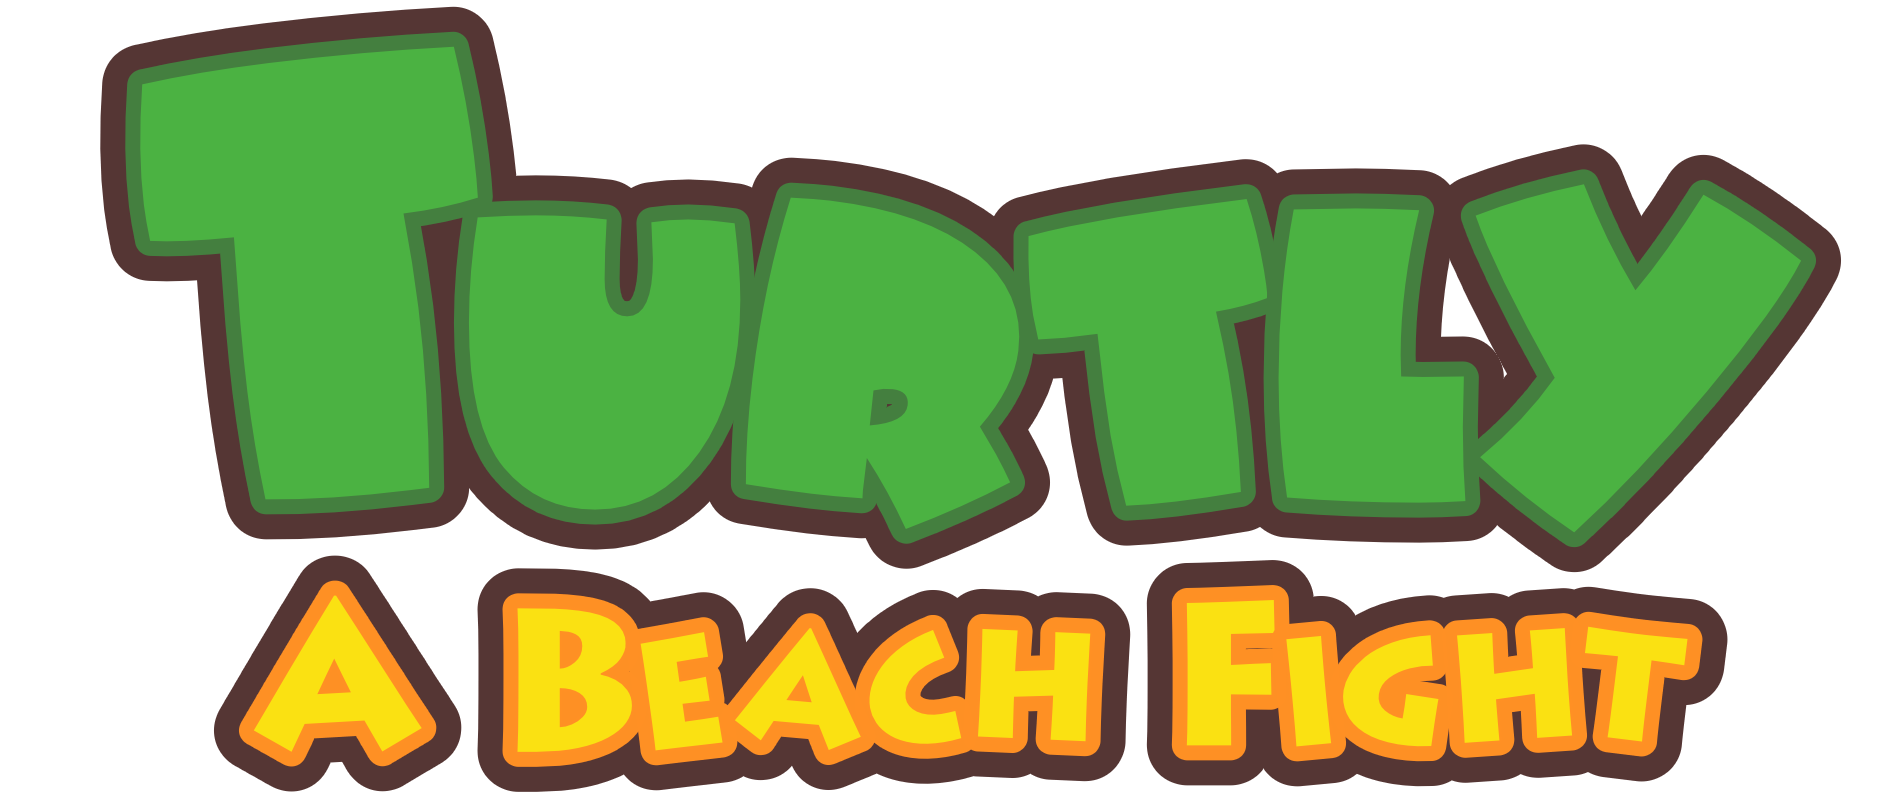 Logo - Turtly - A Beach Fight - Indie Game